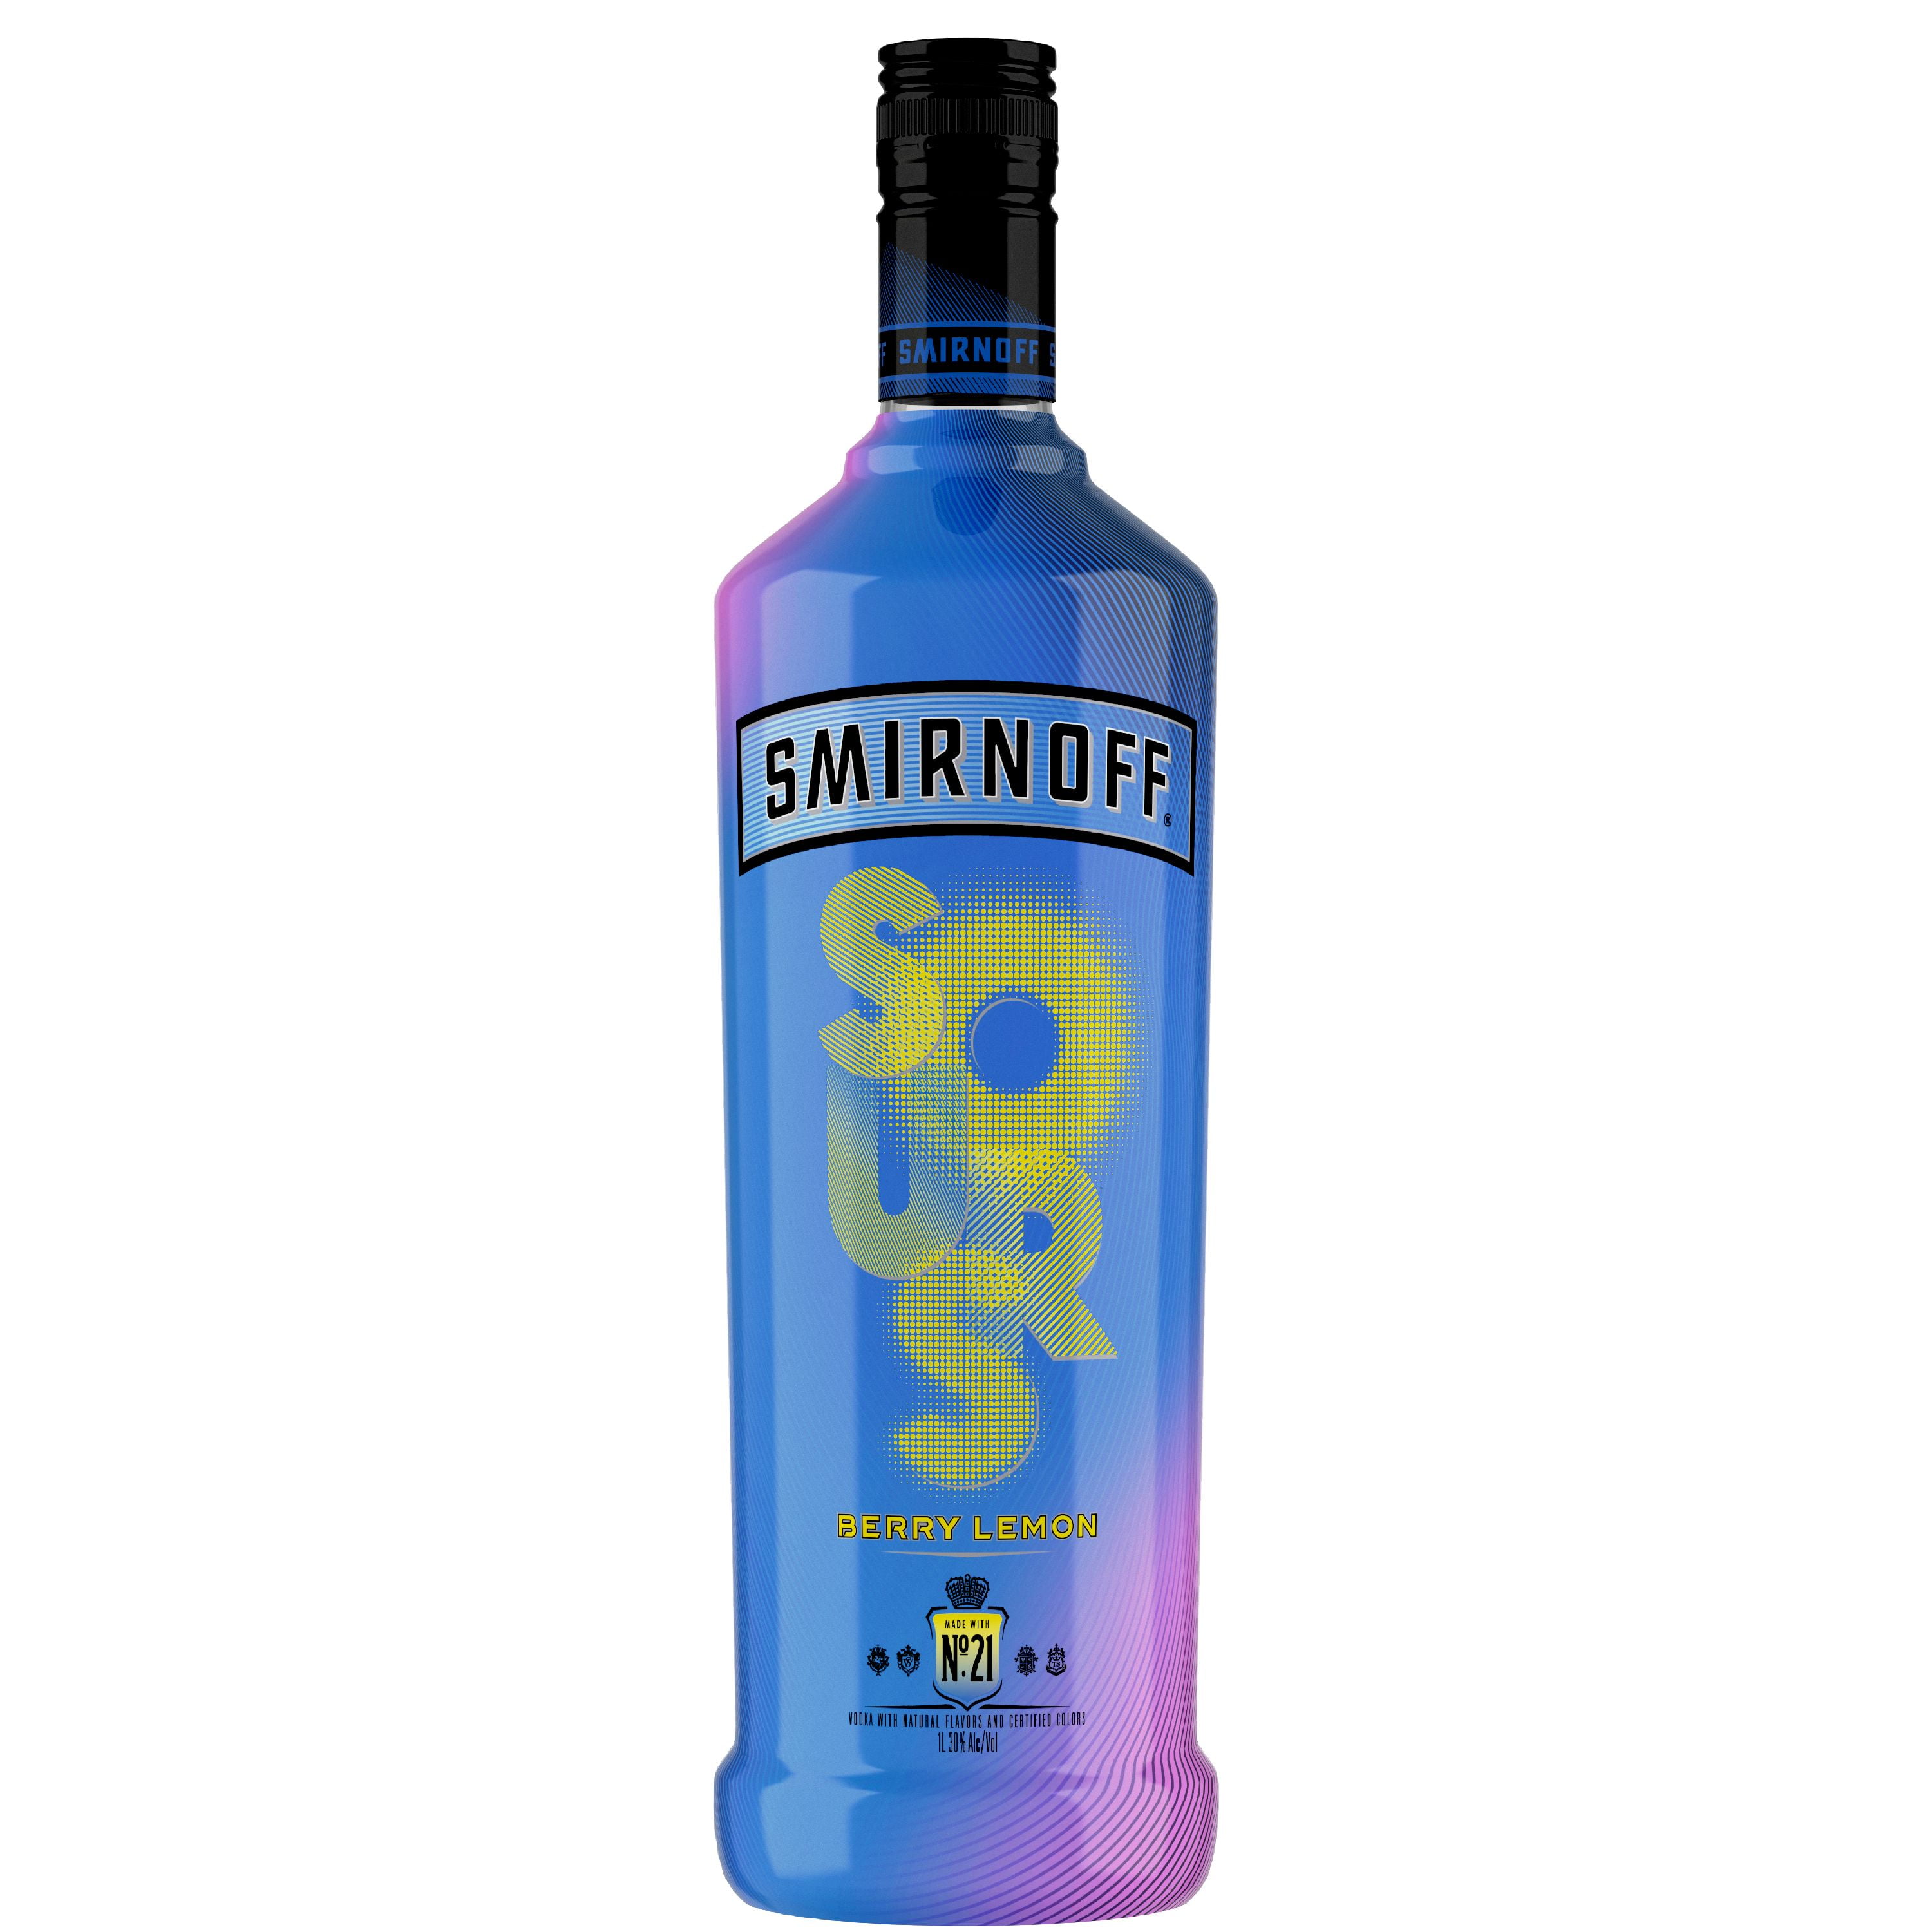 Smirnoff Sours Berry Lemon 60 Proof (Vodka Infused with Natural Flavors ...